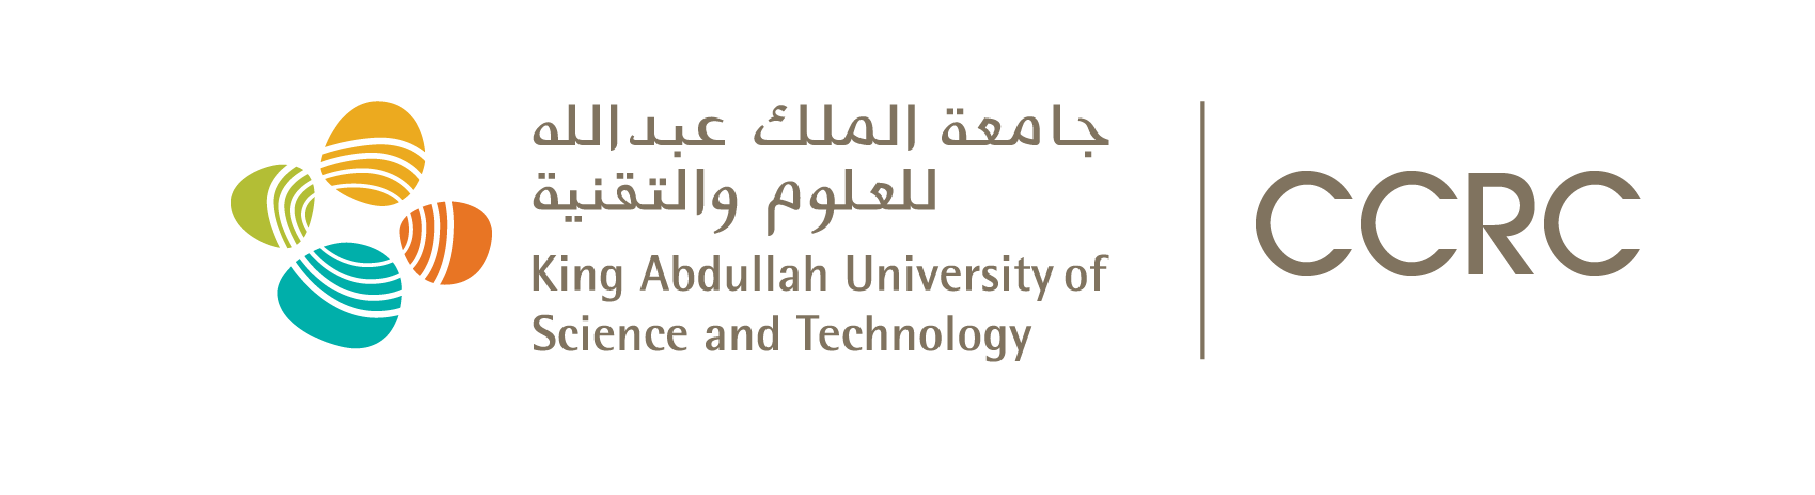 KAUST and CCRC logo